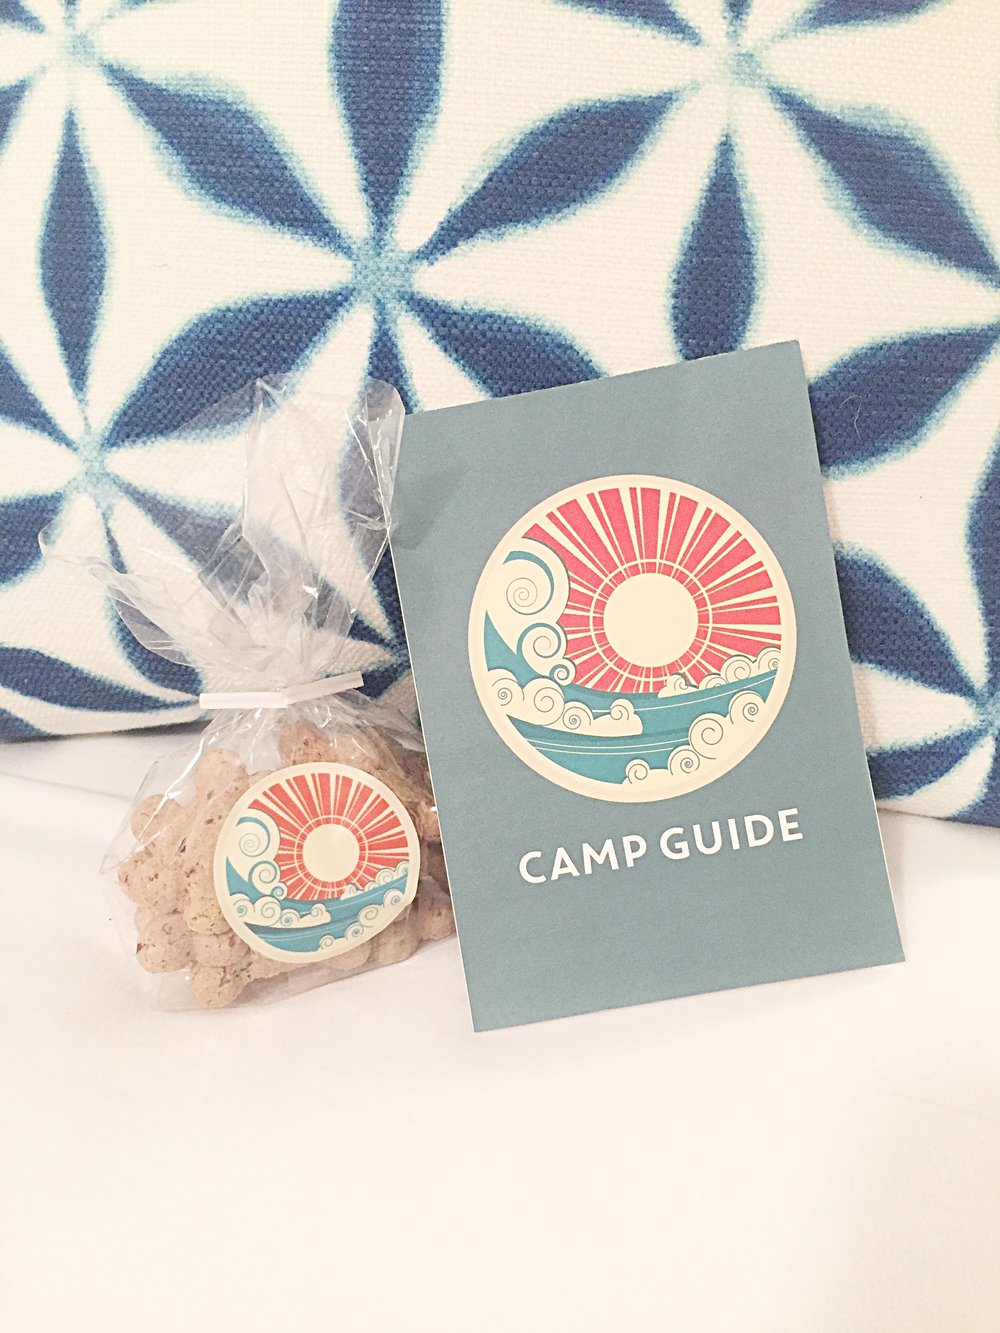  Welcome kit from Summercamp&nbsp; 